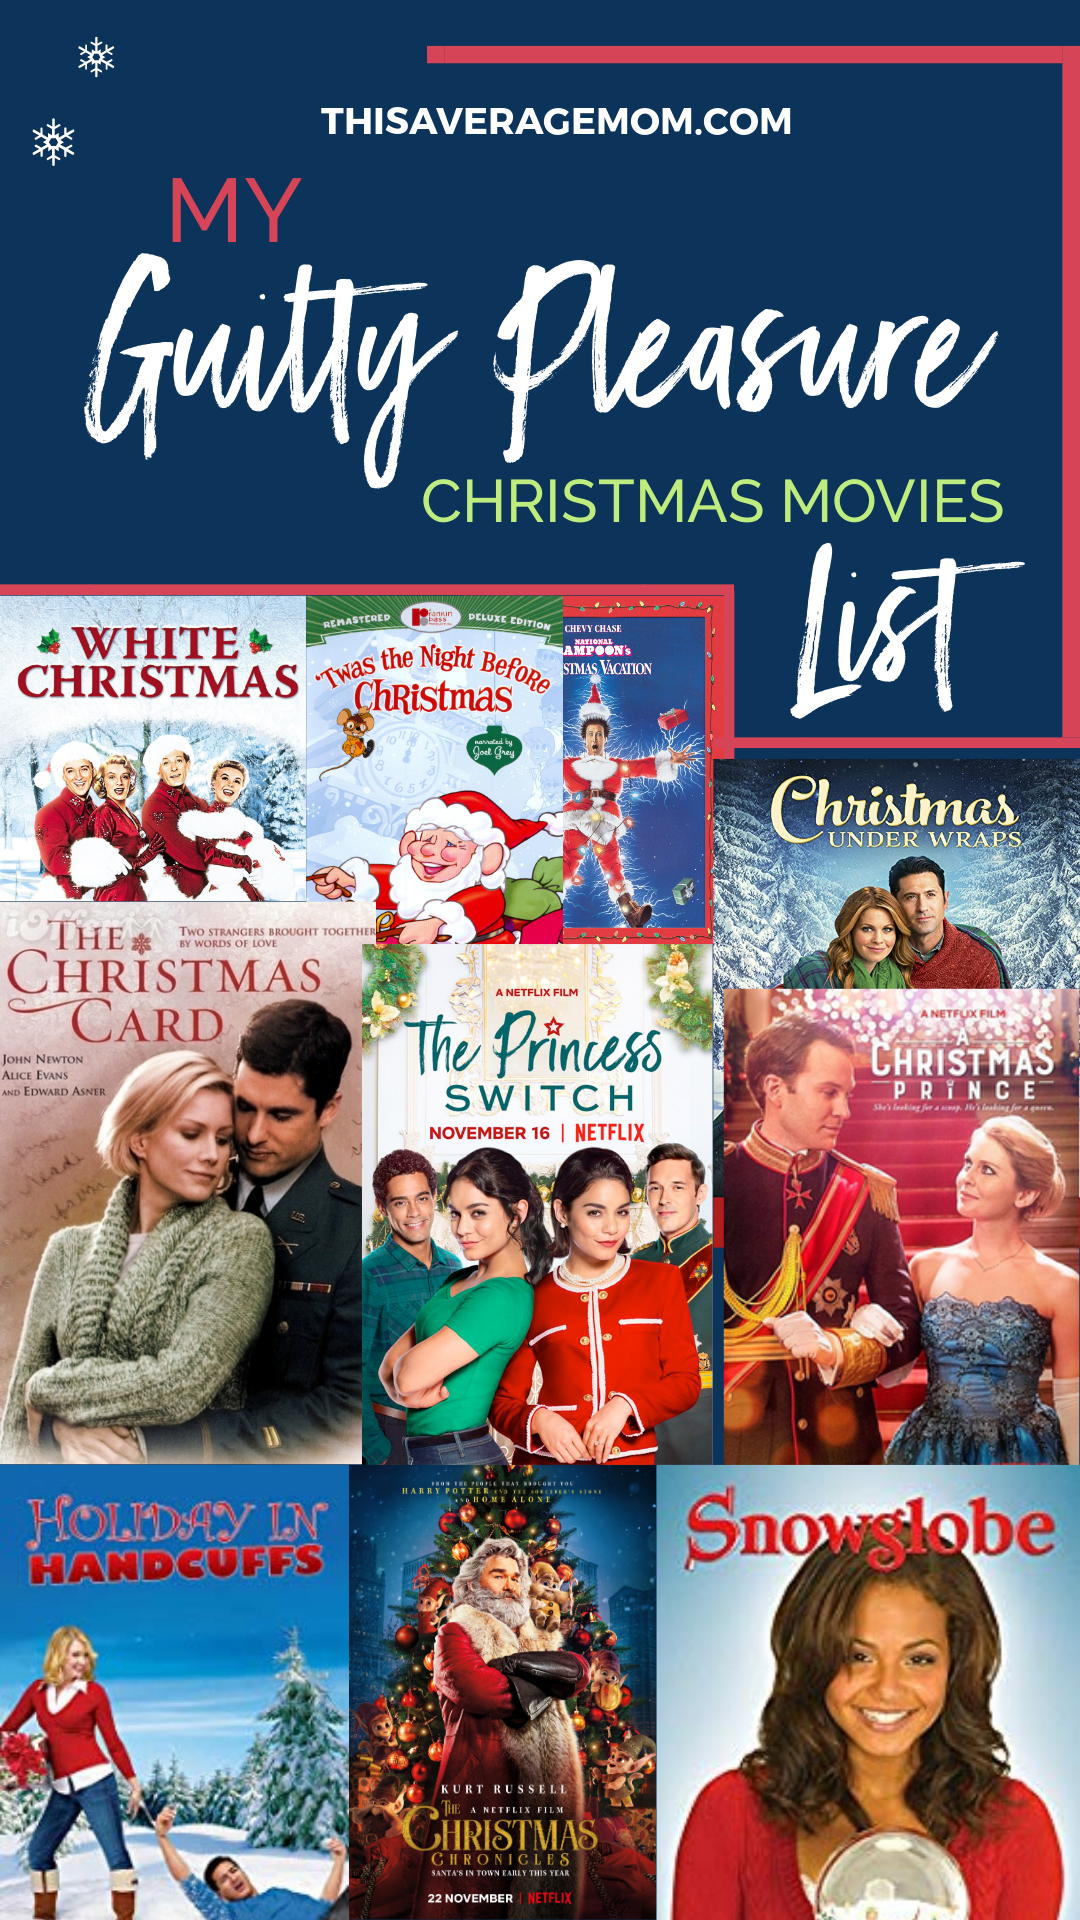  I’m talking about all the corny, amazing Christmas movies on the blog today! From Hallmark, to Netflix, to DVDs and On Demand, I’ve got you!! Grab your fuzzy slippers, cozy blanket, and hot cocoa because it’s time to snuggle up with a good holiday movie!! FA LA LA LA LA!